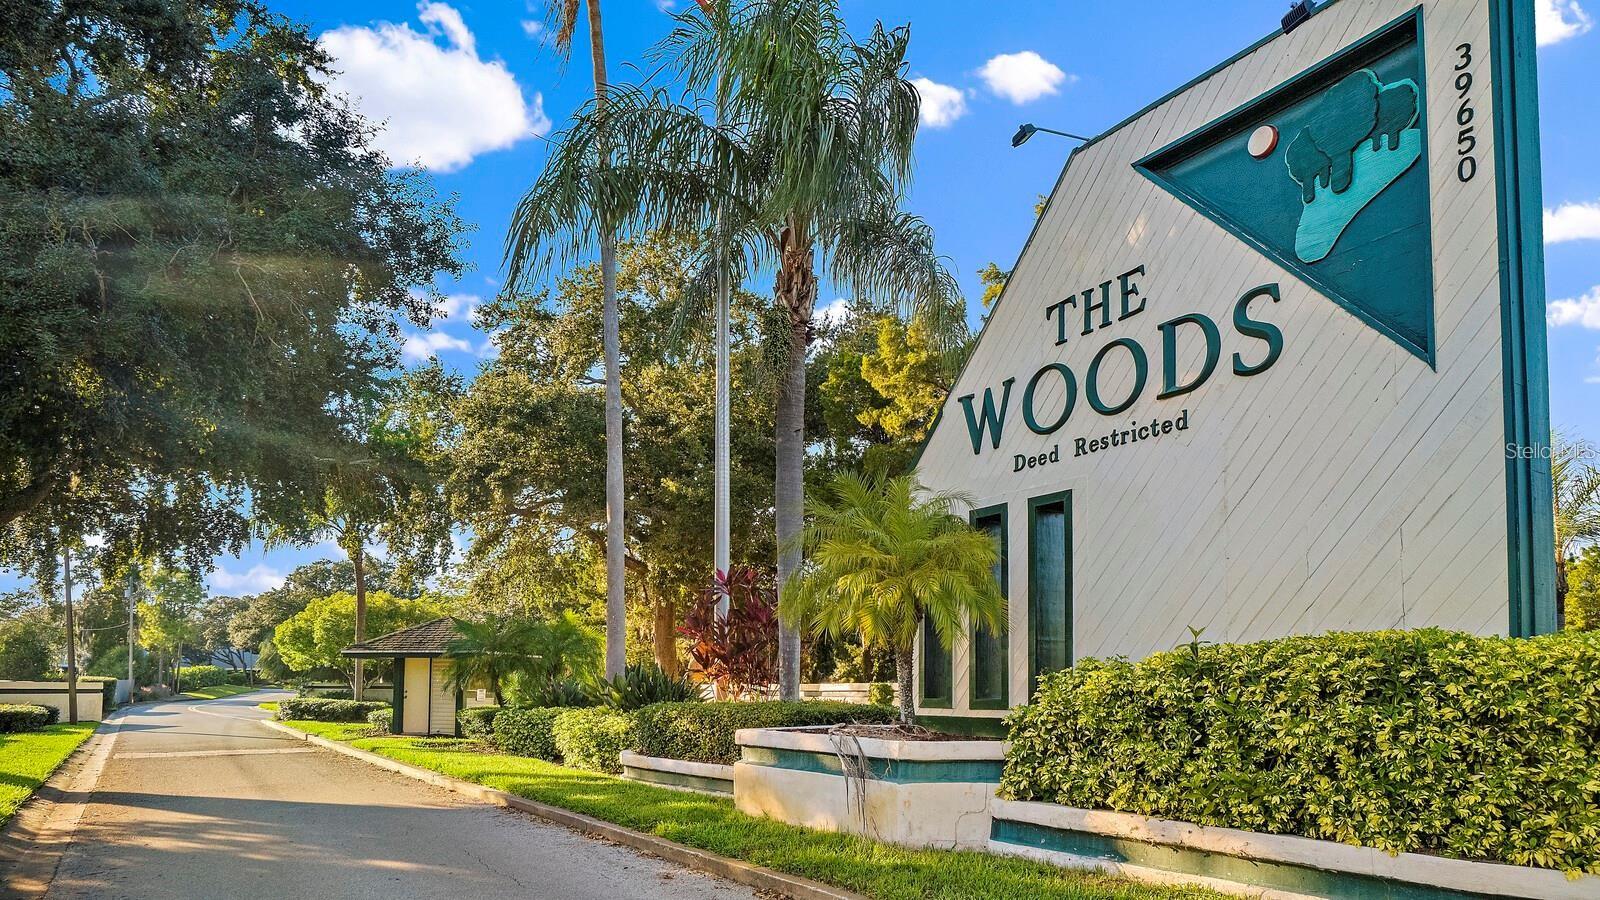 Another view of the Woods sign